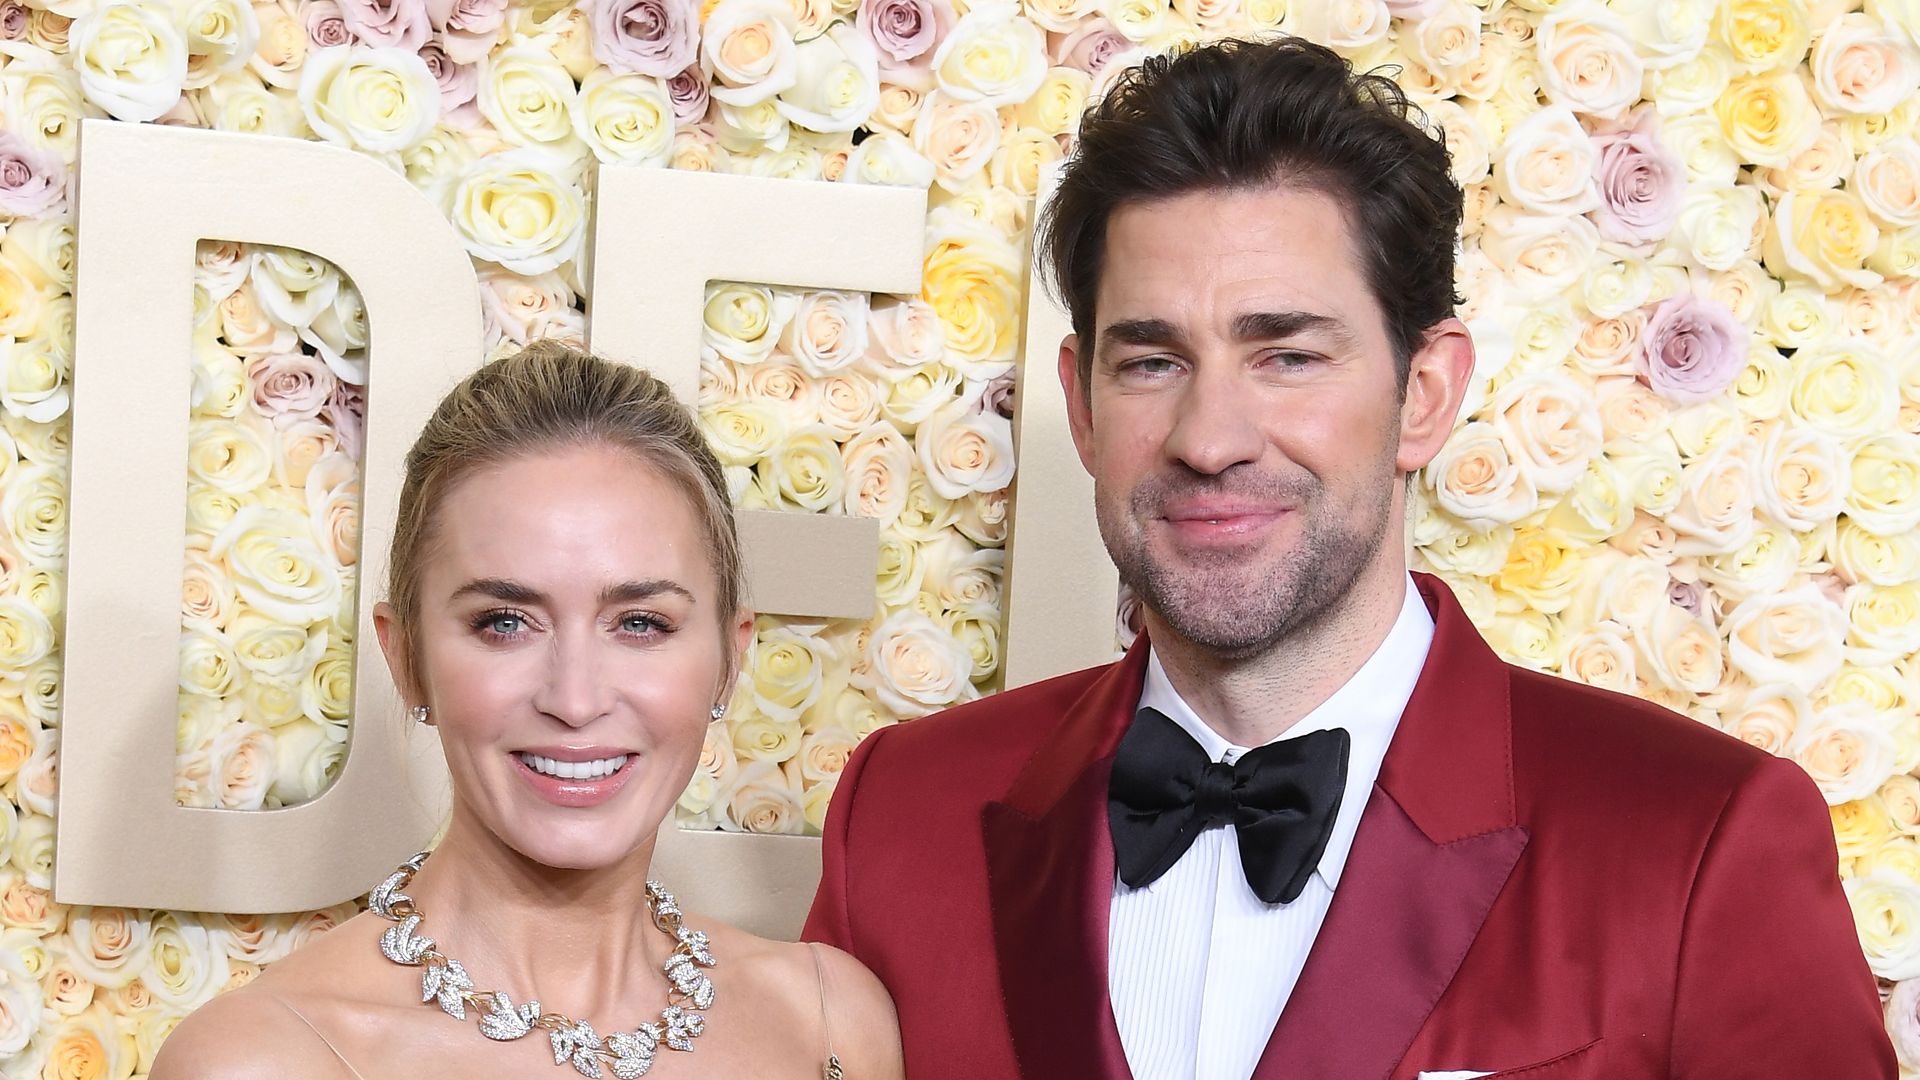 Emily Blunt And John Krasinski S Romance From Their George Clooney Style Wedding To Divorce